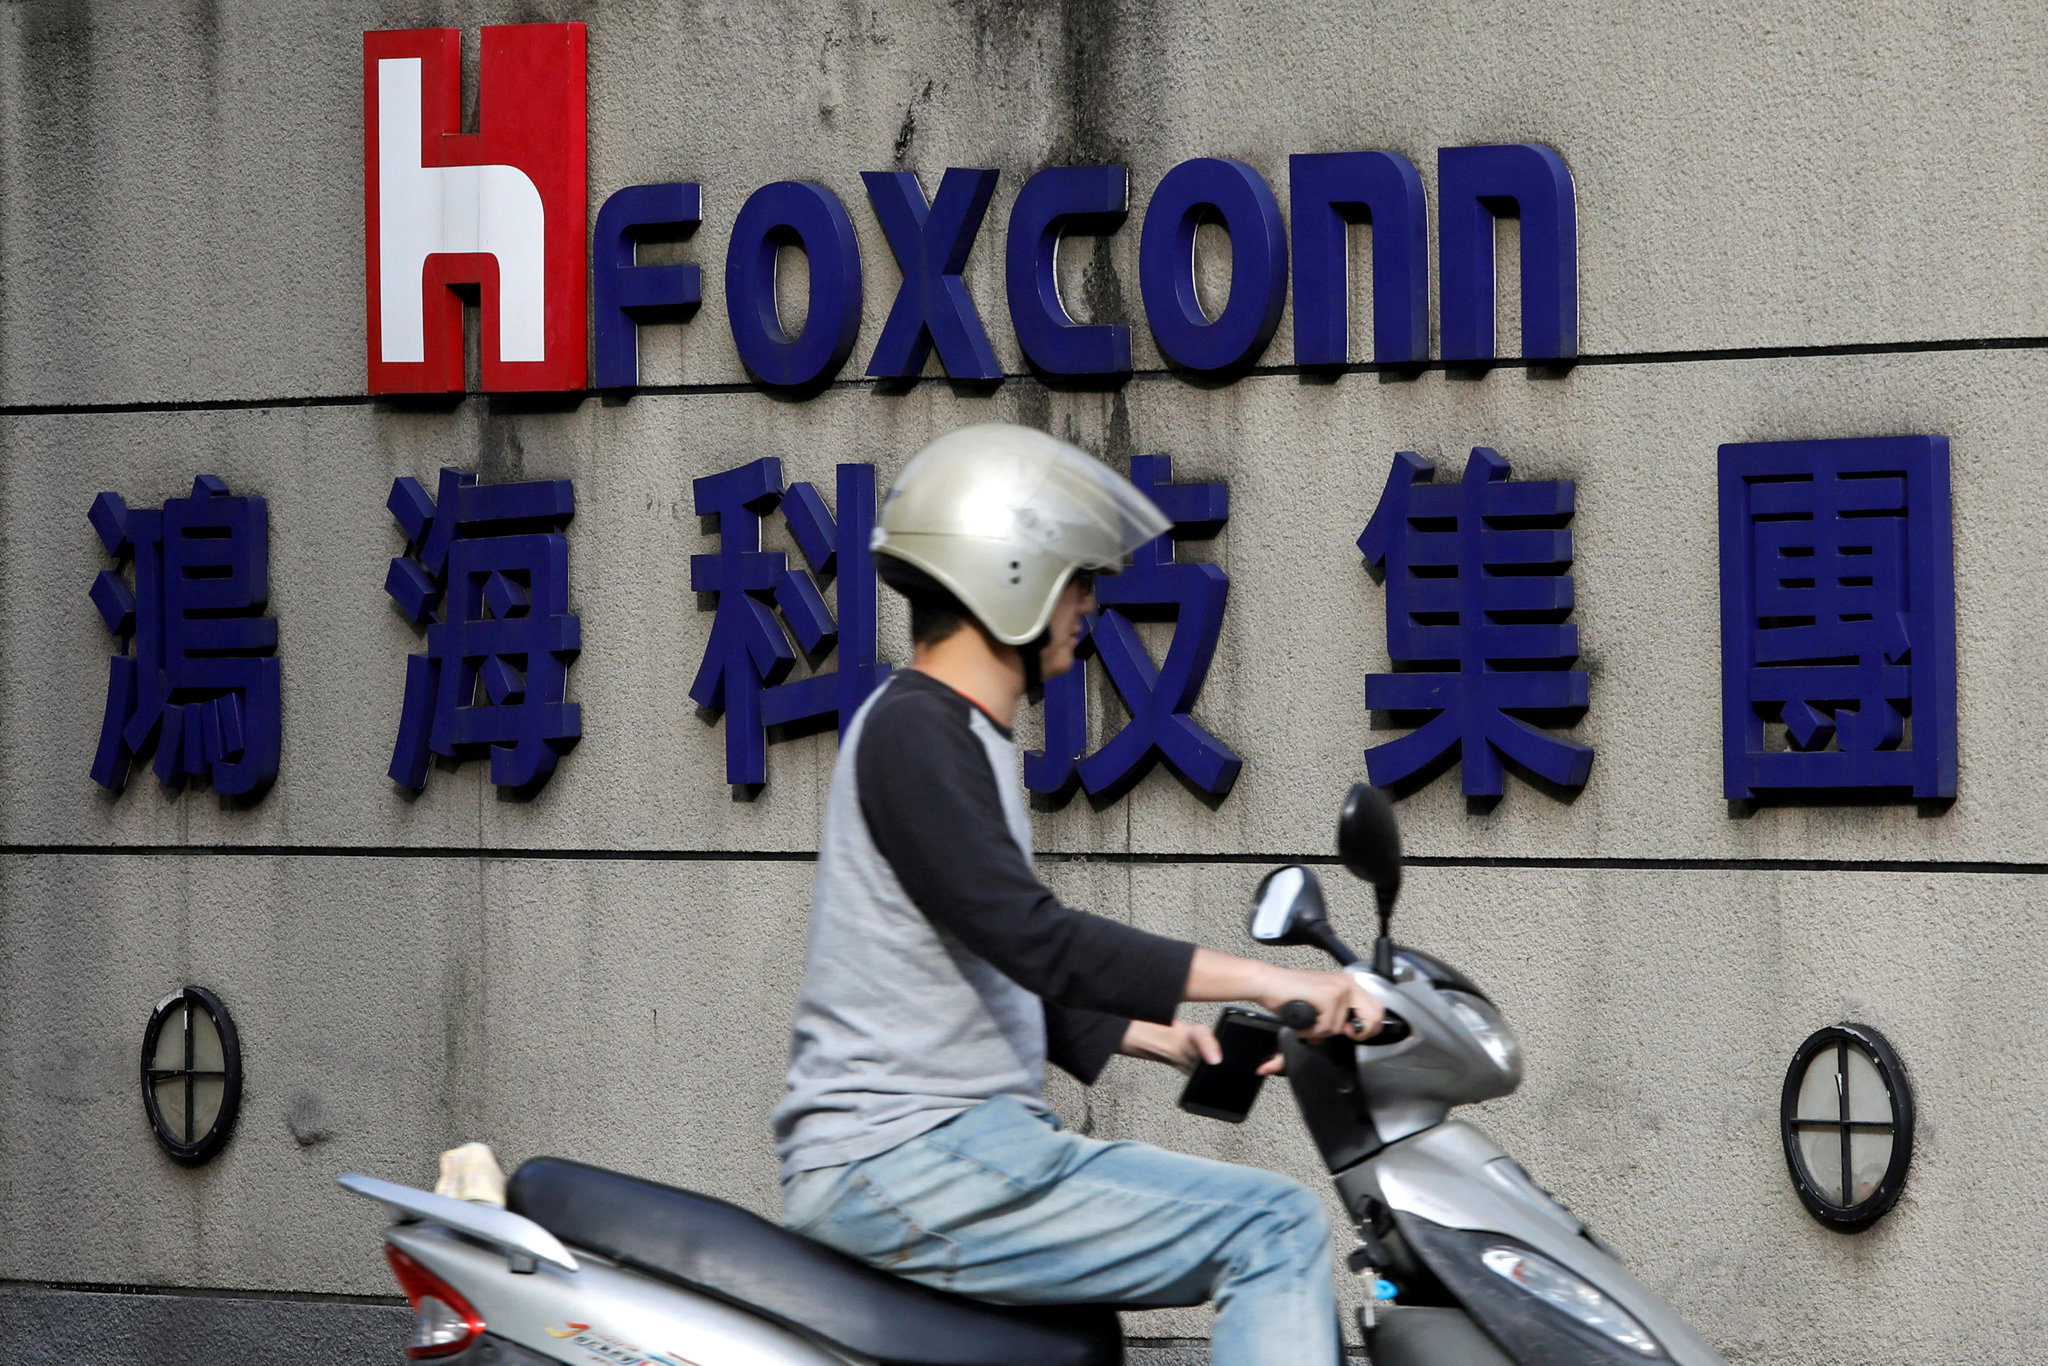 foxconn_scooter